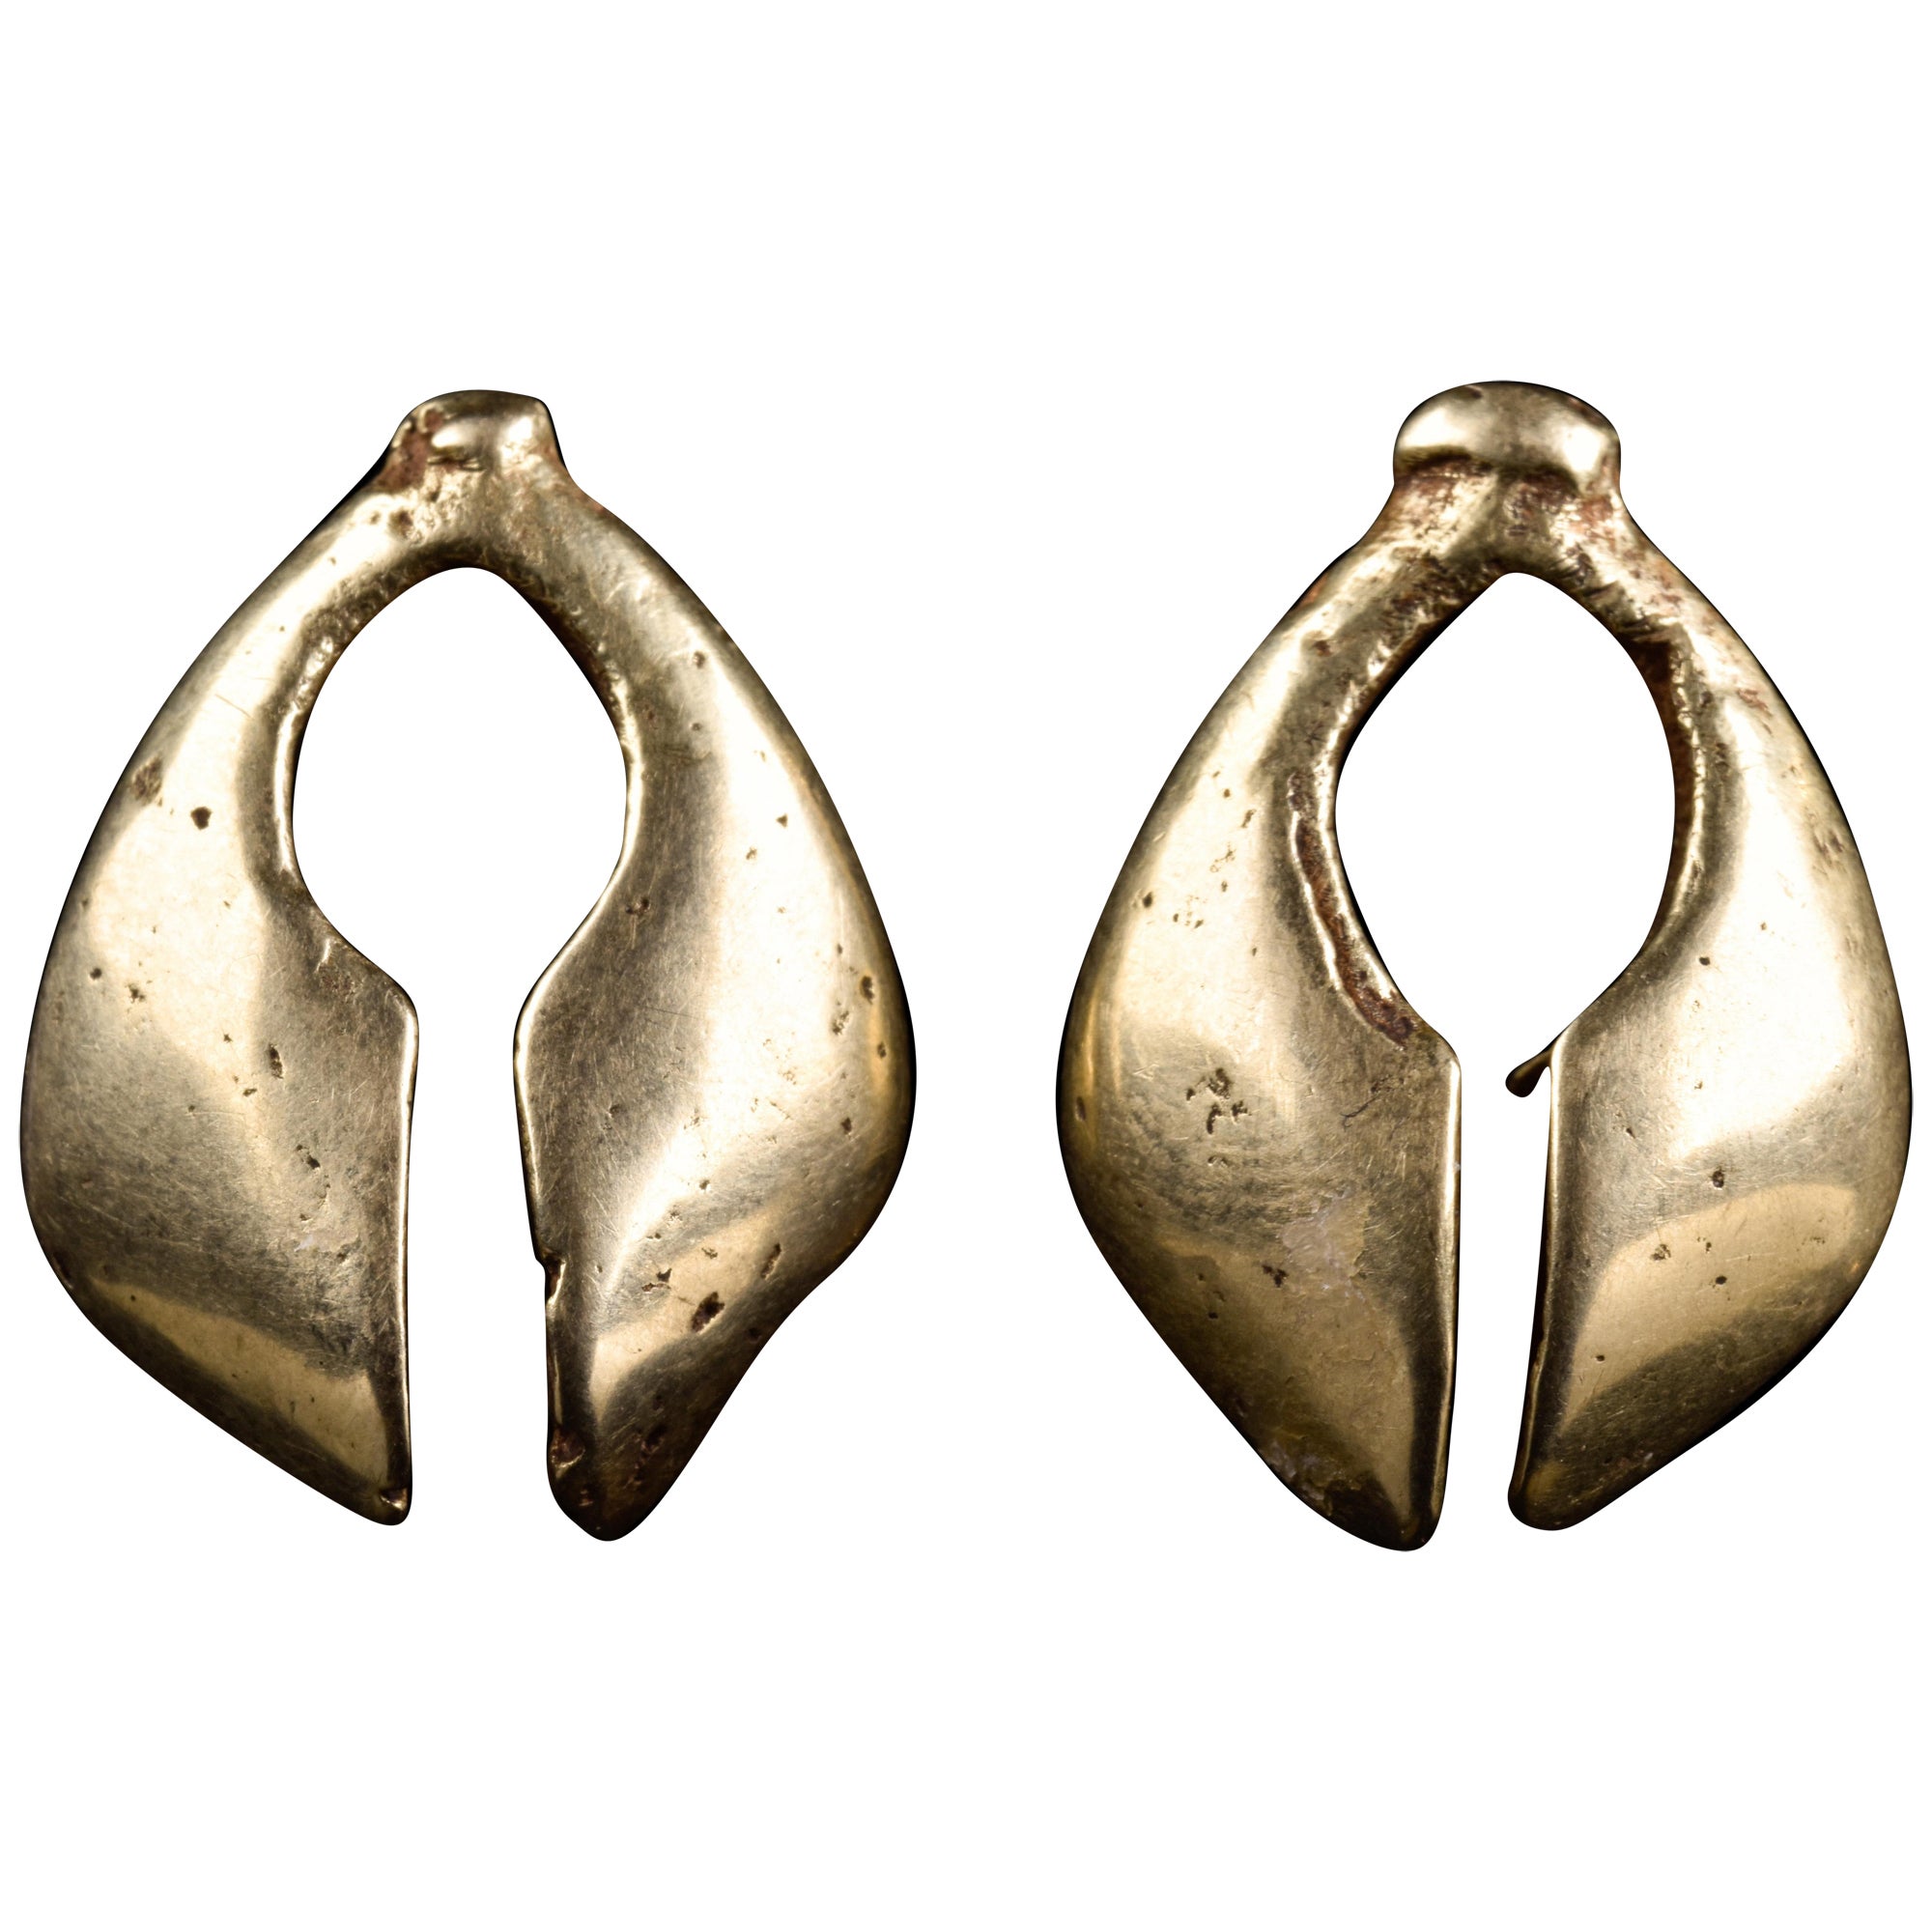 Bronze Age Matched Pair of Gold Earrings